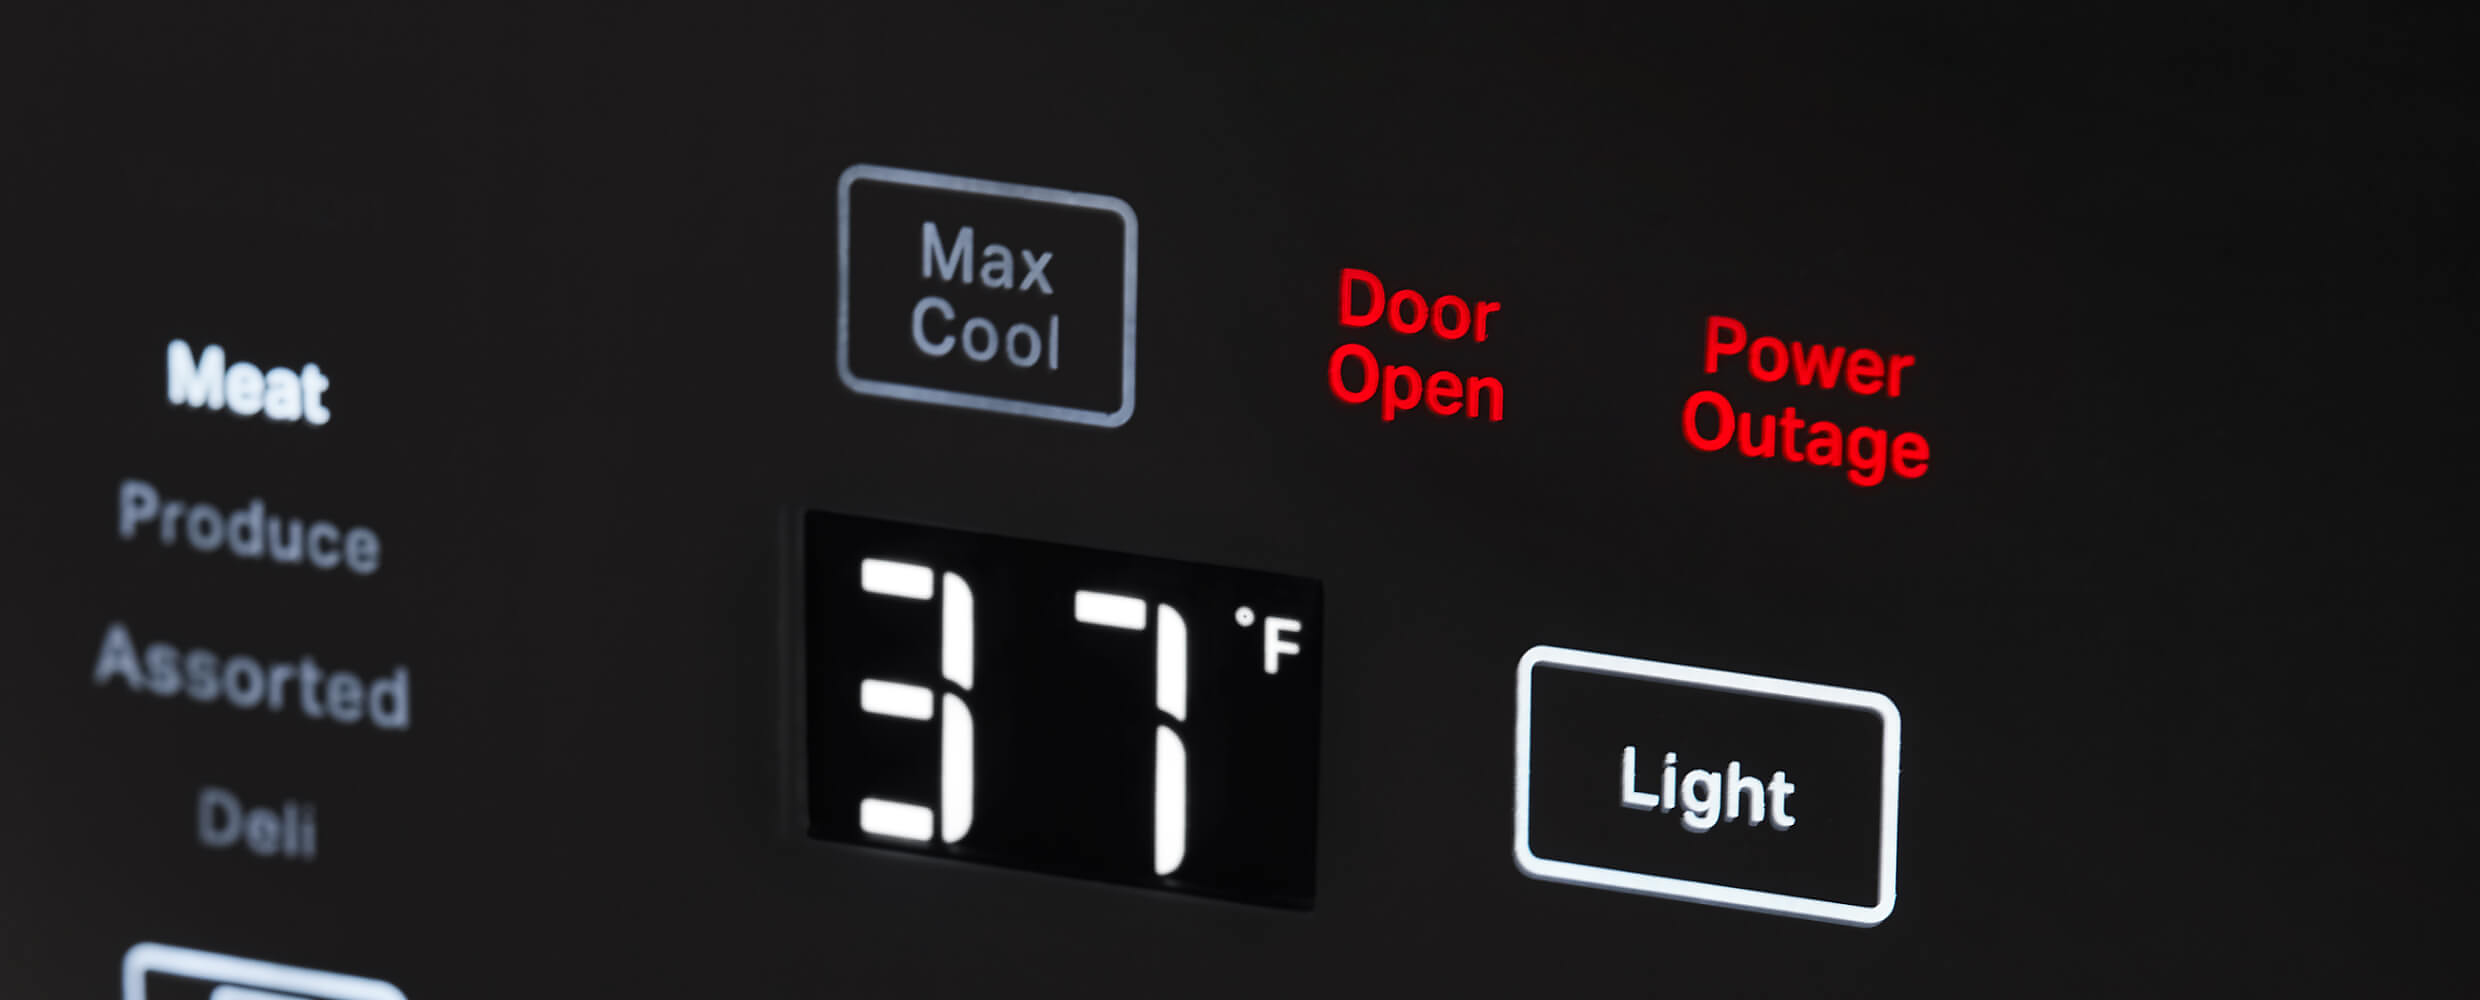 Door Open and Power Outage buttons on External Touchscreen Controls on the 42" KitchenAid® Built-In Side-by-Side Refrigerator